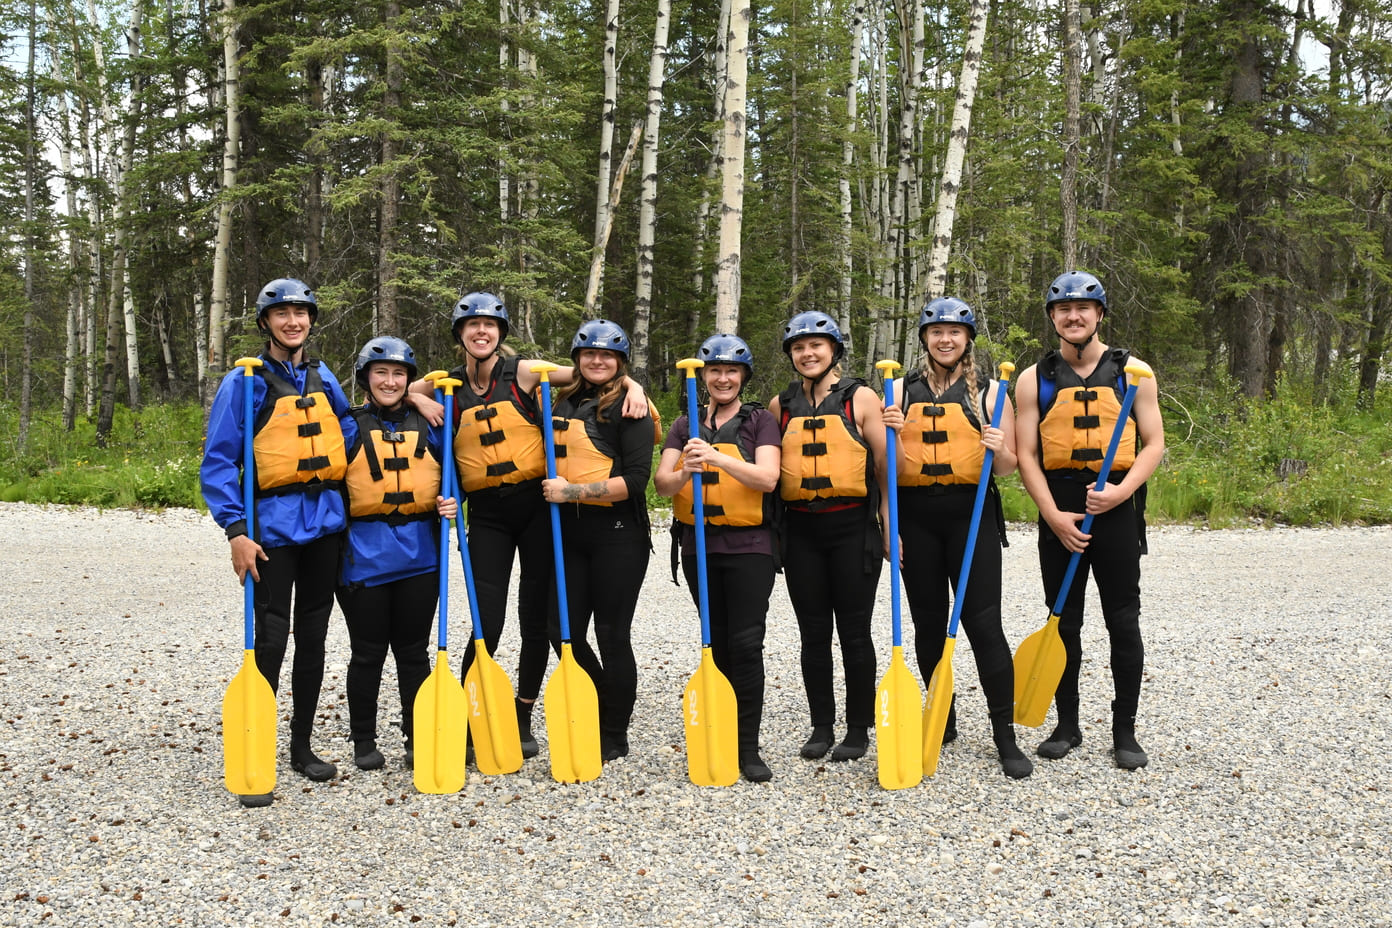 Fairshare team on a shore with river rafting gear and paddles.